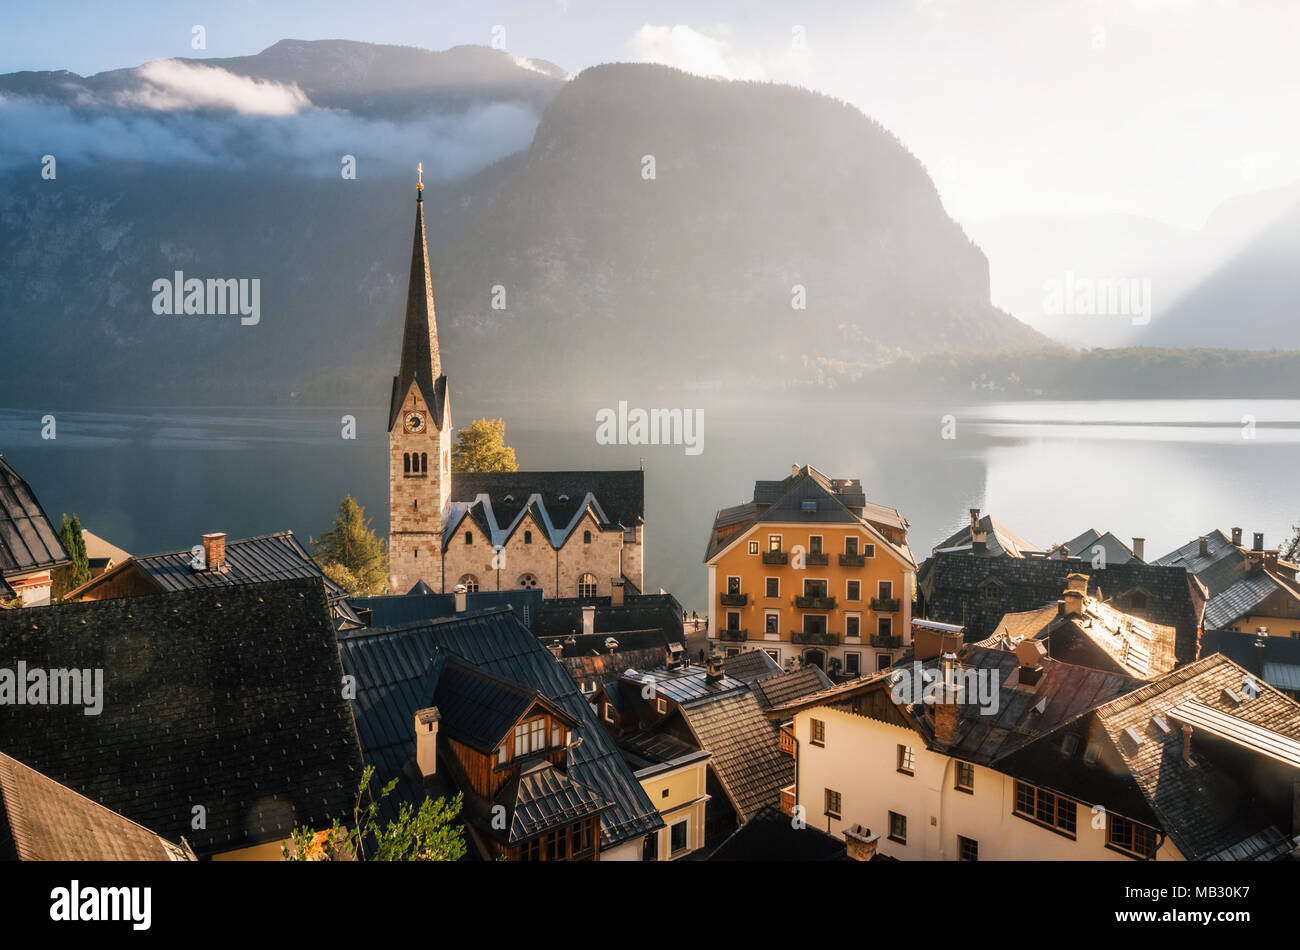 Scenic view of famous Hallstatt town on Hallstattersee lake in the Austrian Alps in morning light with bright clouds, Salzkammergut region, Austria Stock Photo